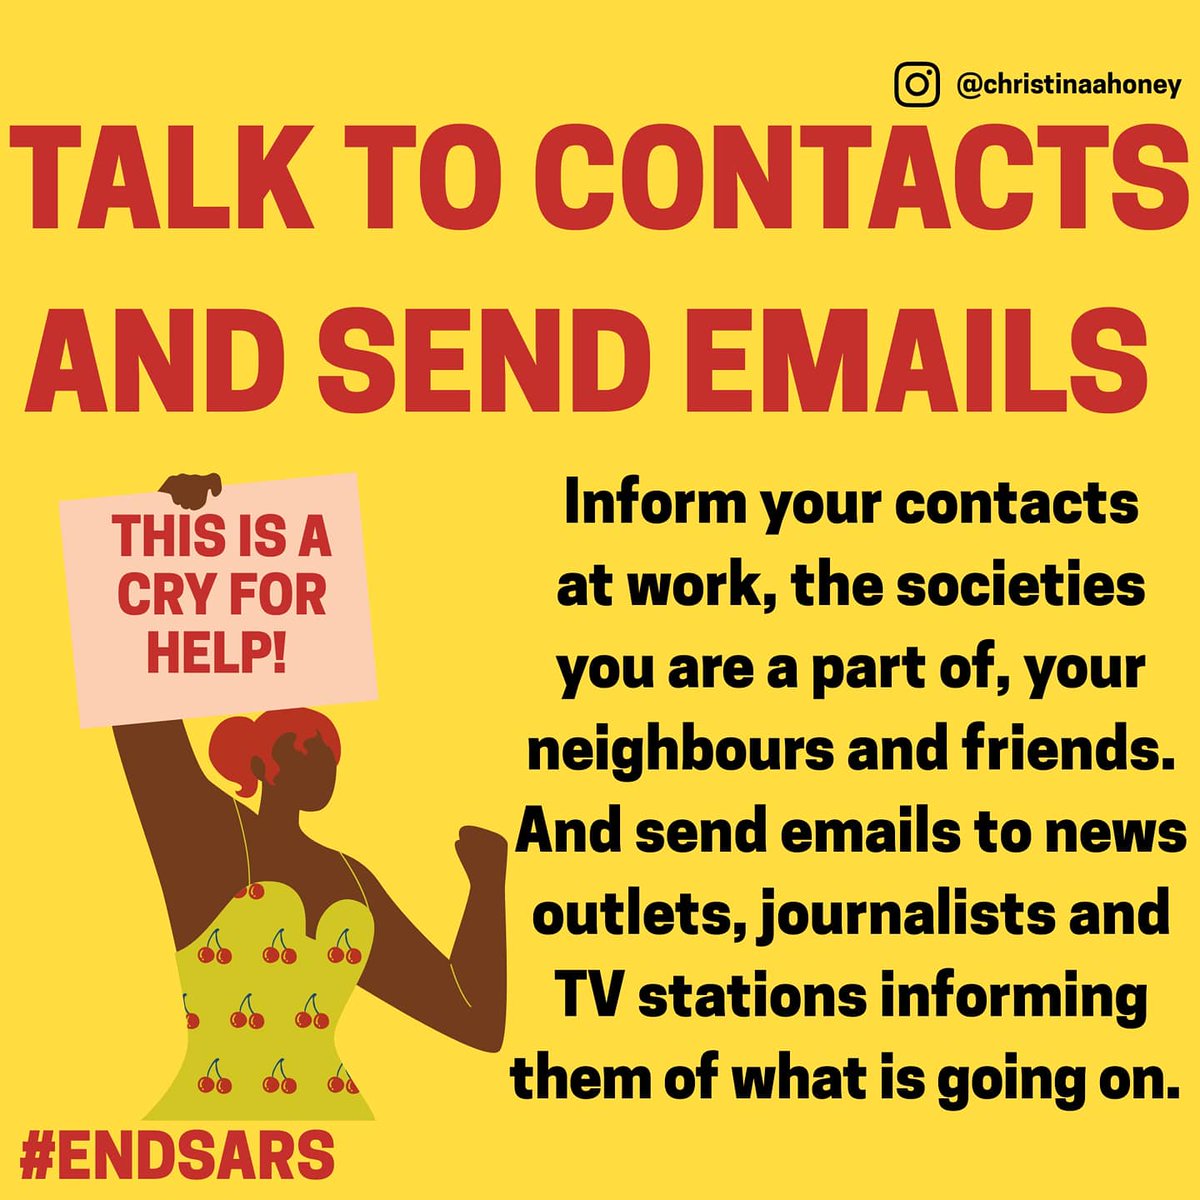 TALK TO YOUR CONTACTS, SEND EMAILS & MAKE PHONE CALLS It's time to get practical. We have raised awareness enough. The whole world knows now.  #EndSARS  